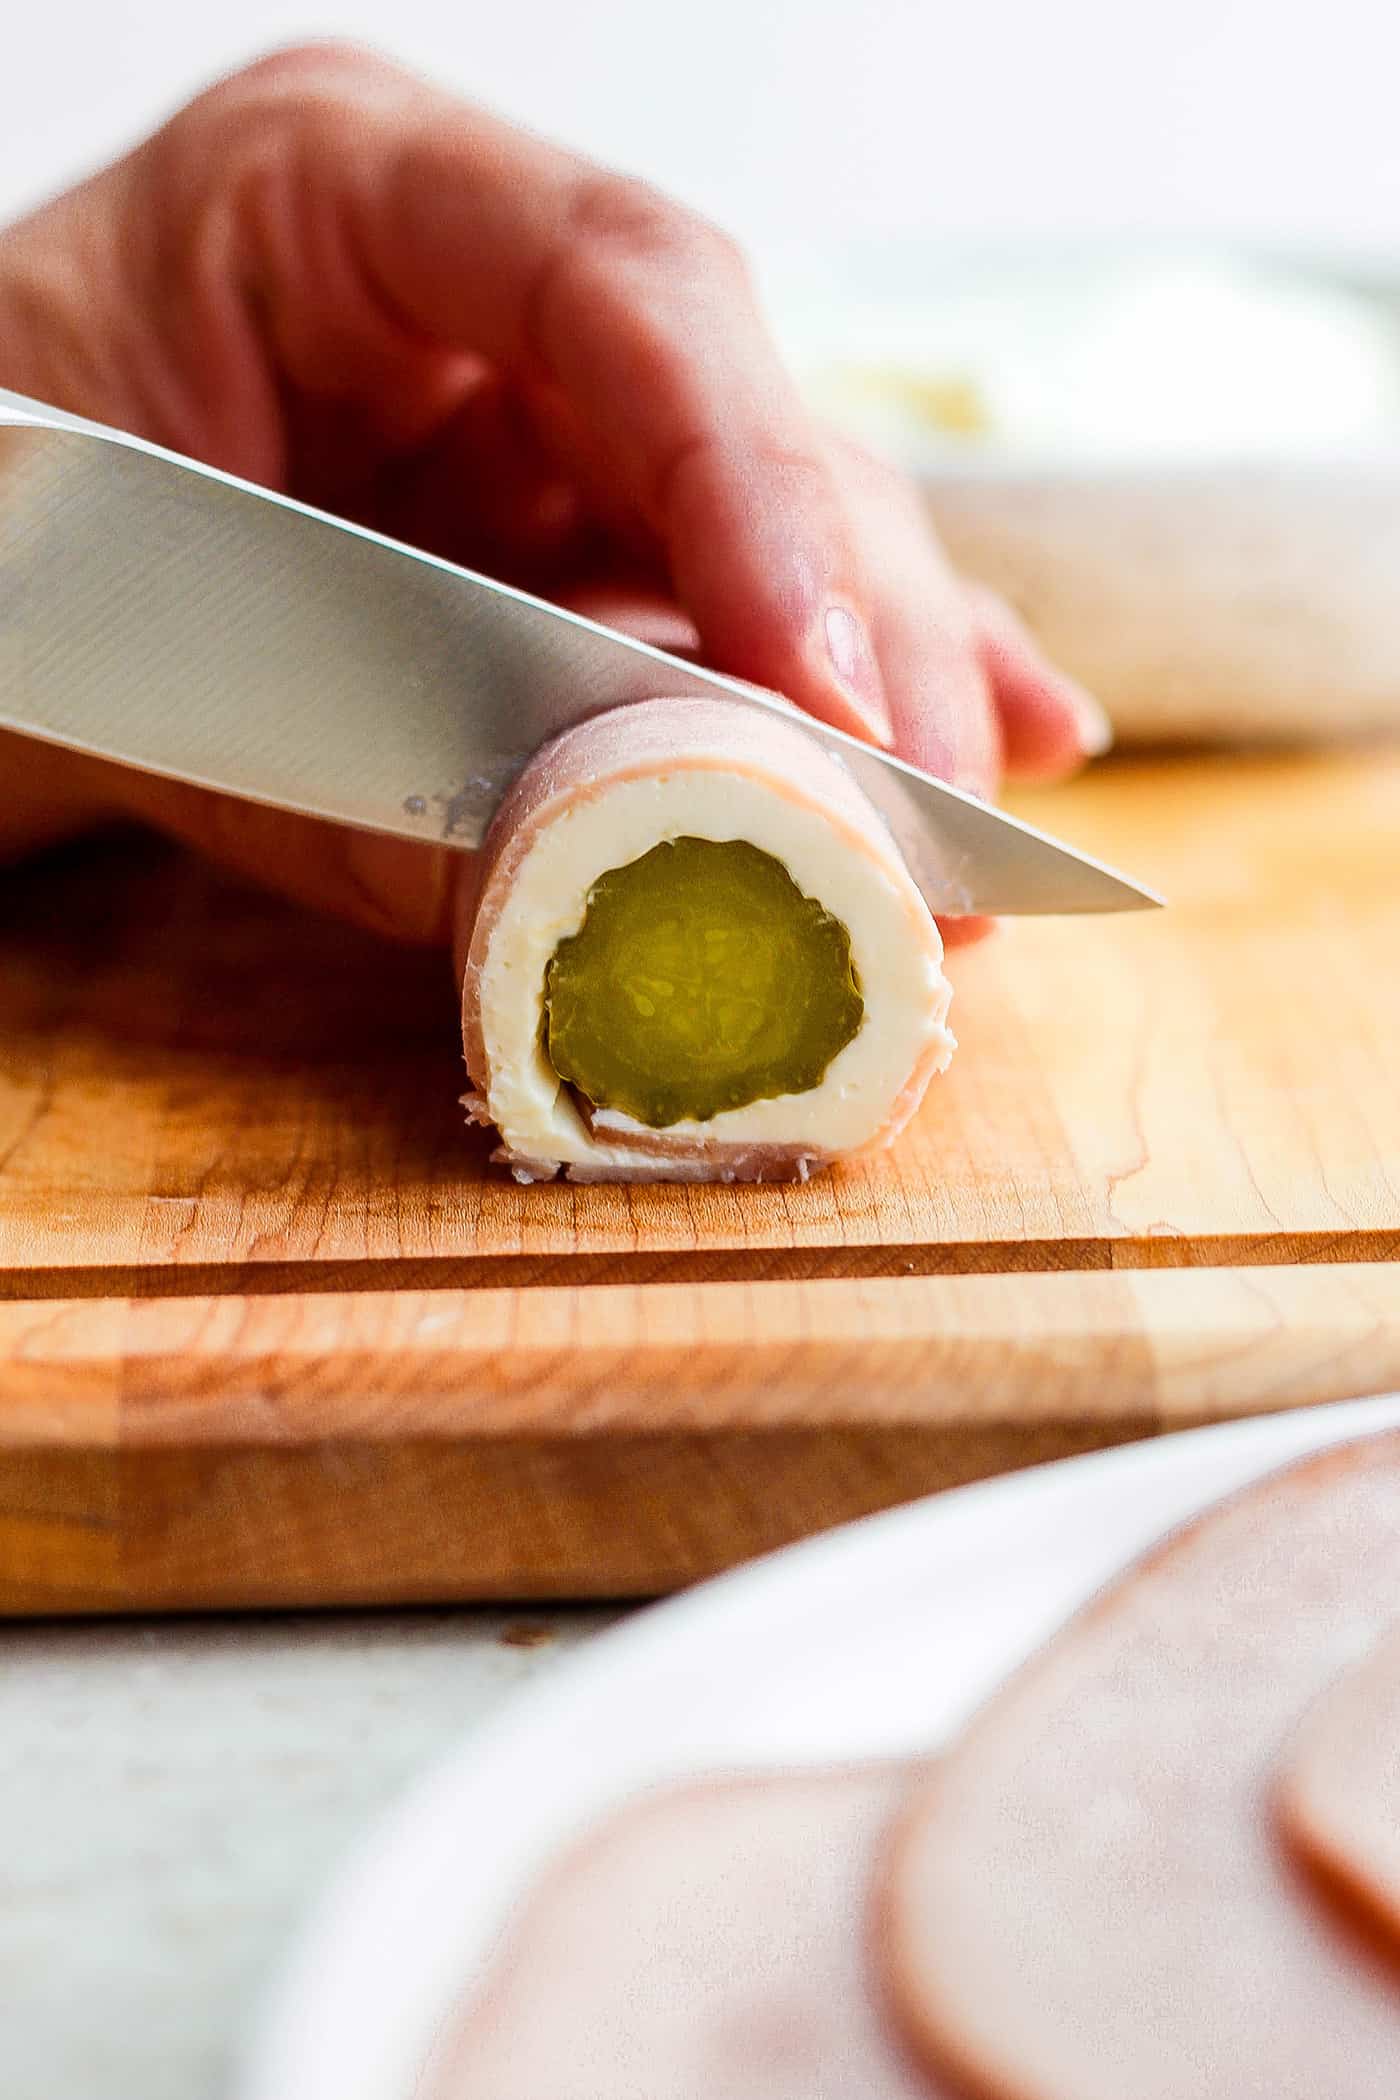 A knife cuts a pickle roll up.